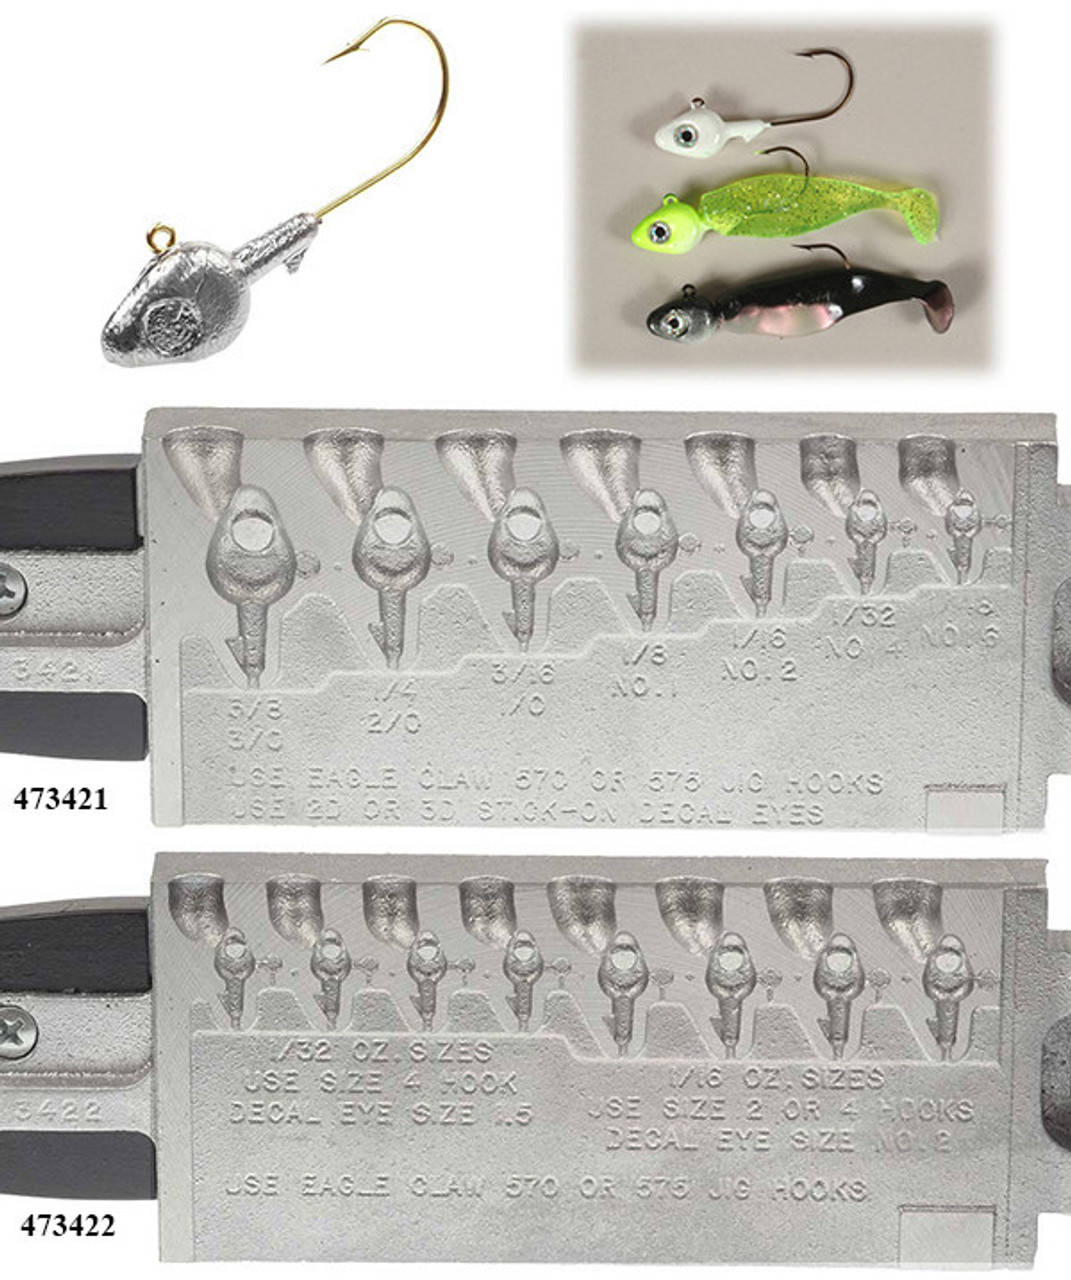 Do-It Minnow Head Jig Molds with Recessed Eyes - Barlow's Tackle